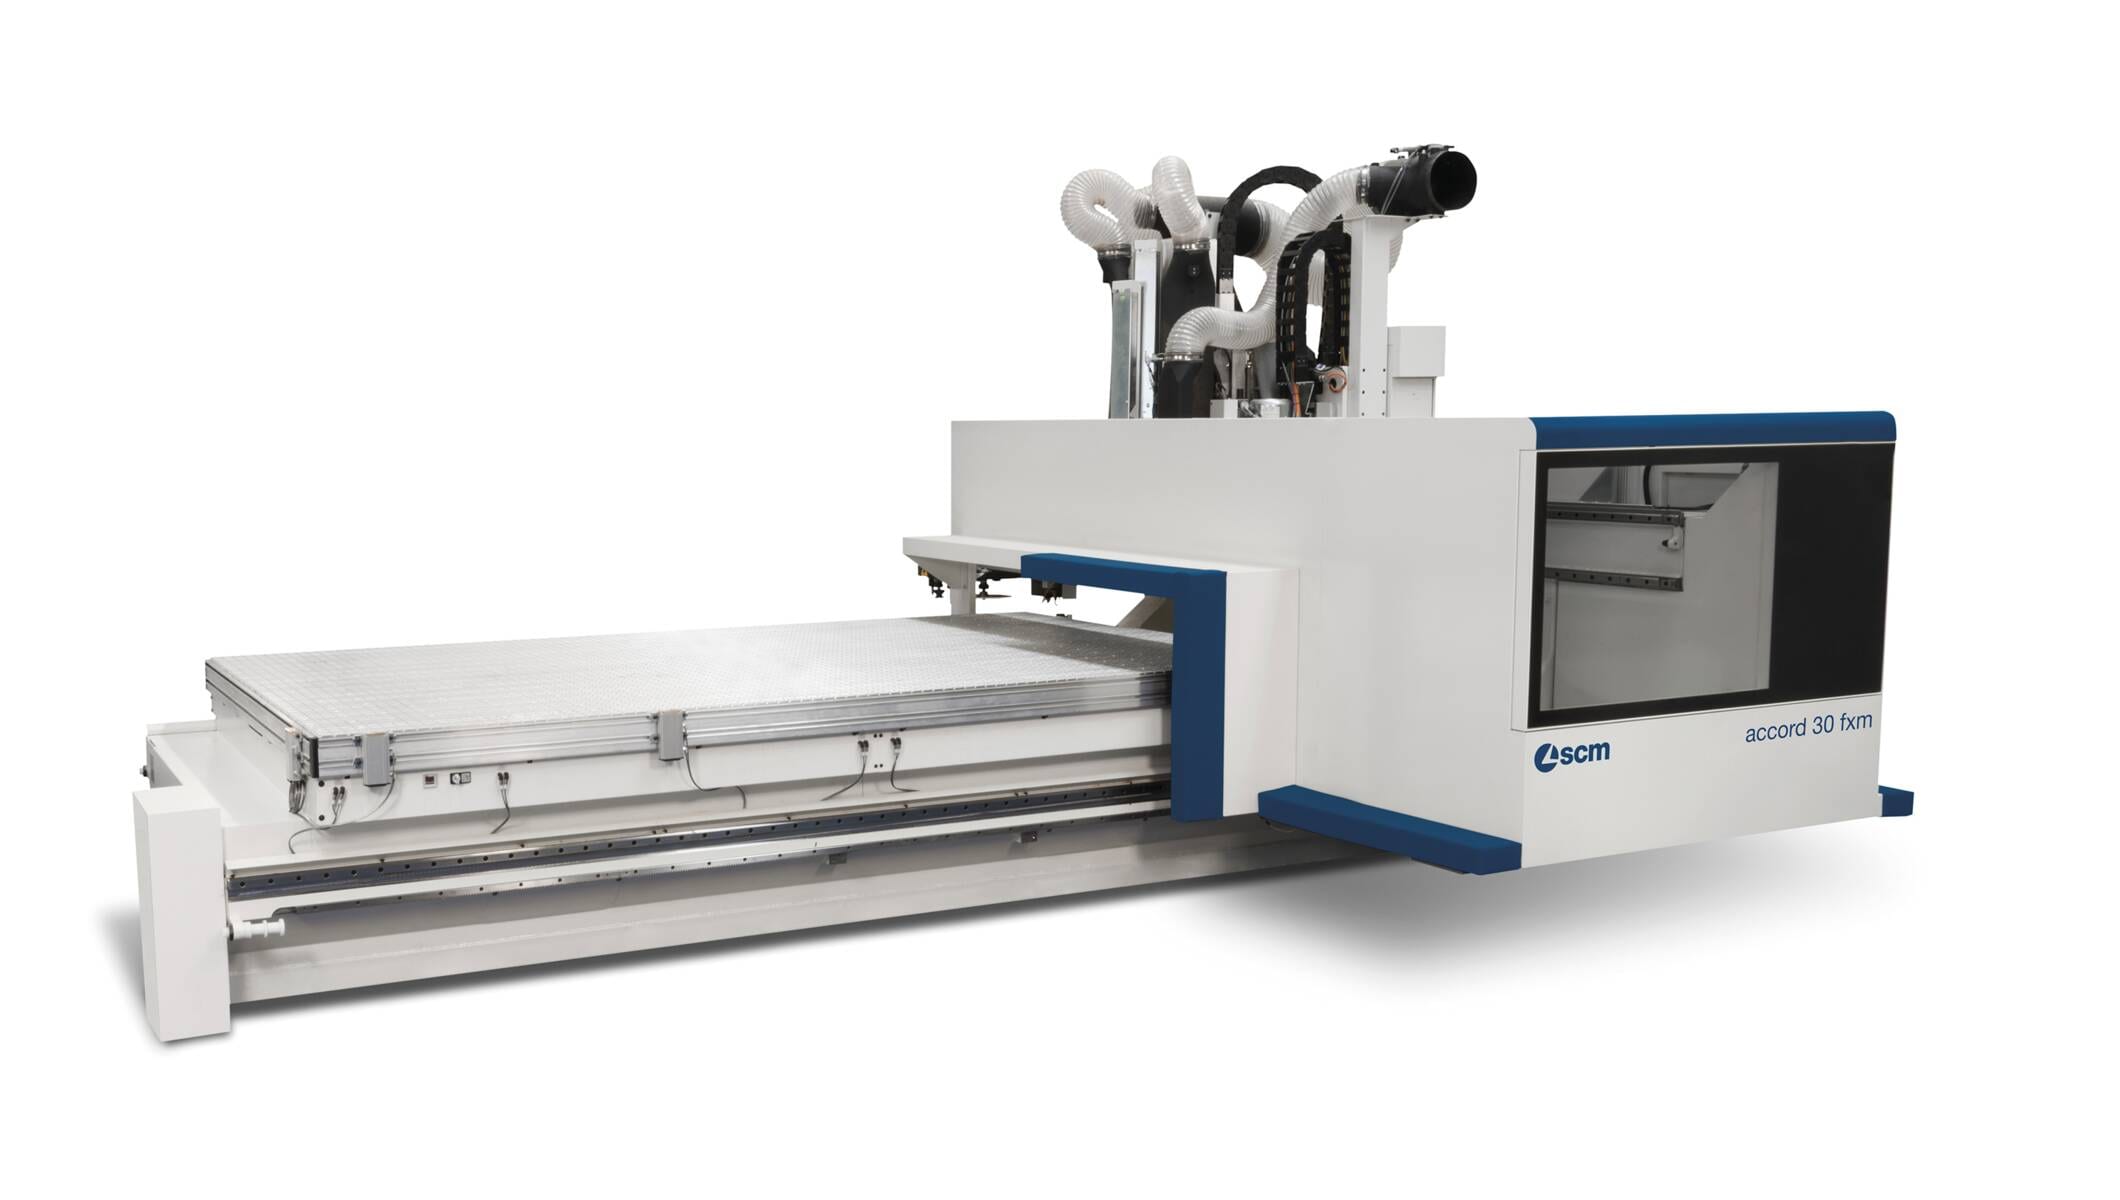 CNC Machining Centers - CNC Nesting Machining Centers for routing and drilling - accord 30 fxm